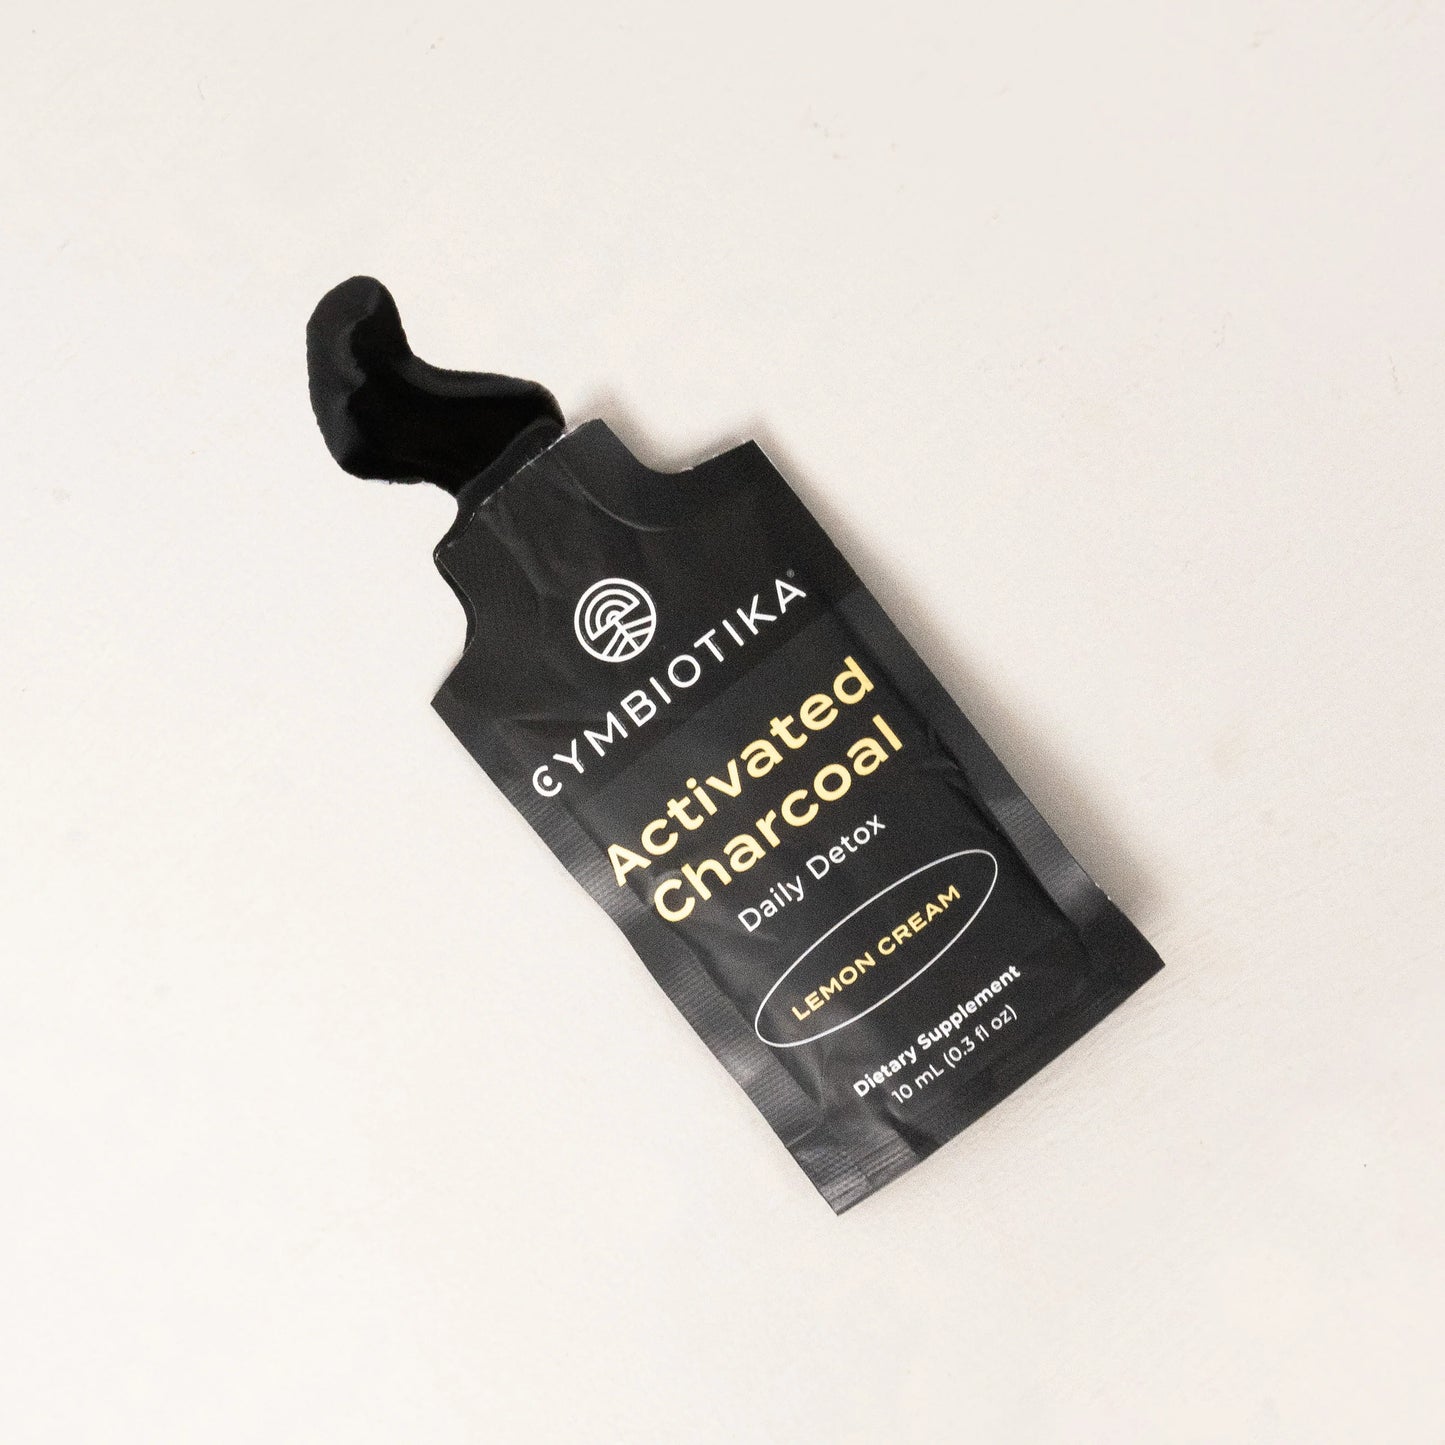 Cymbiotika Activated Charcoal Liquid Packets